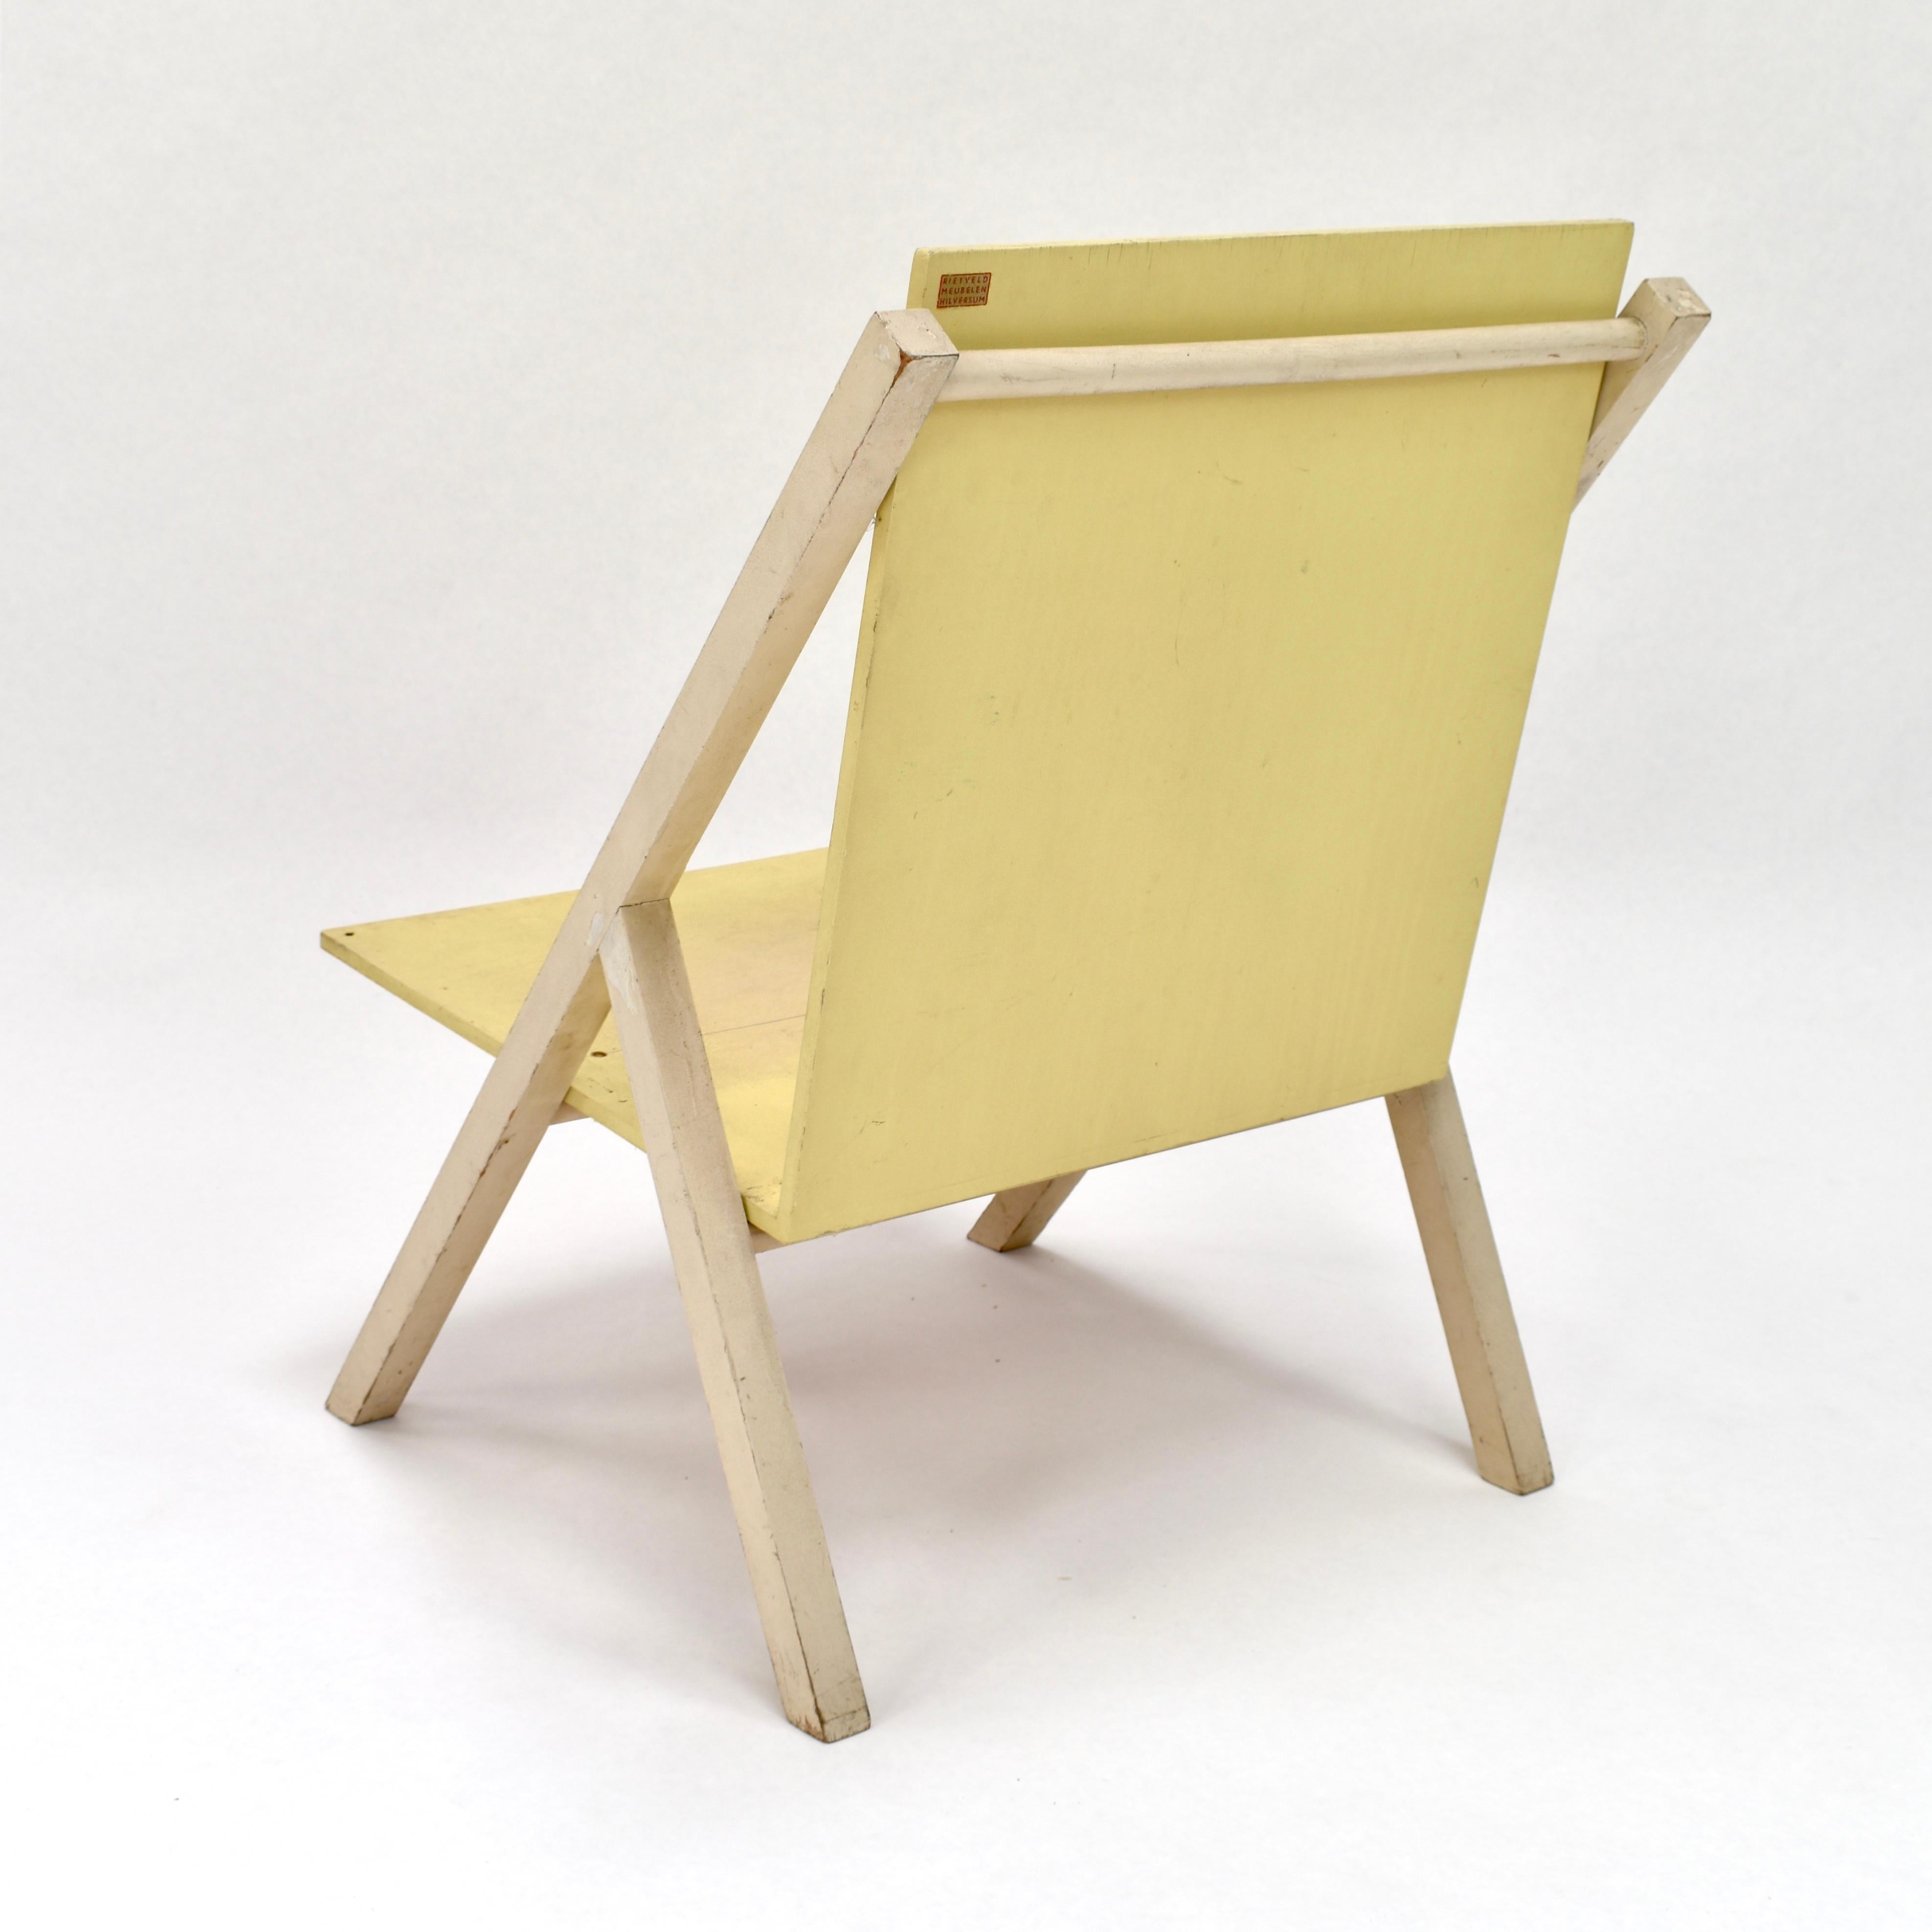 Gerrit Rietveld Jr. Prototype Salon Chair, Netherlands, 1955 In Distressed Condition For Sale In Pijnacker, Zuid-Holland